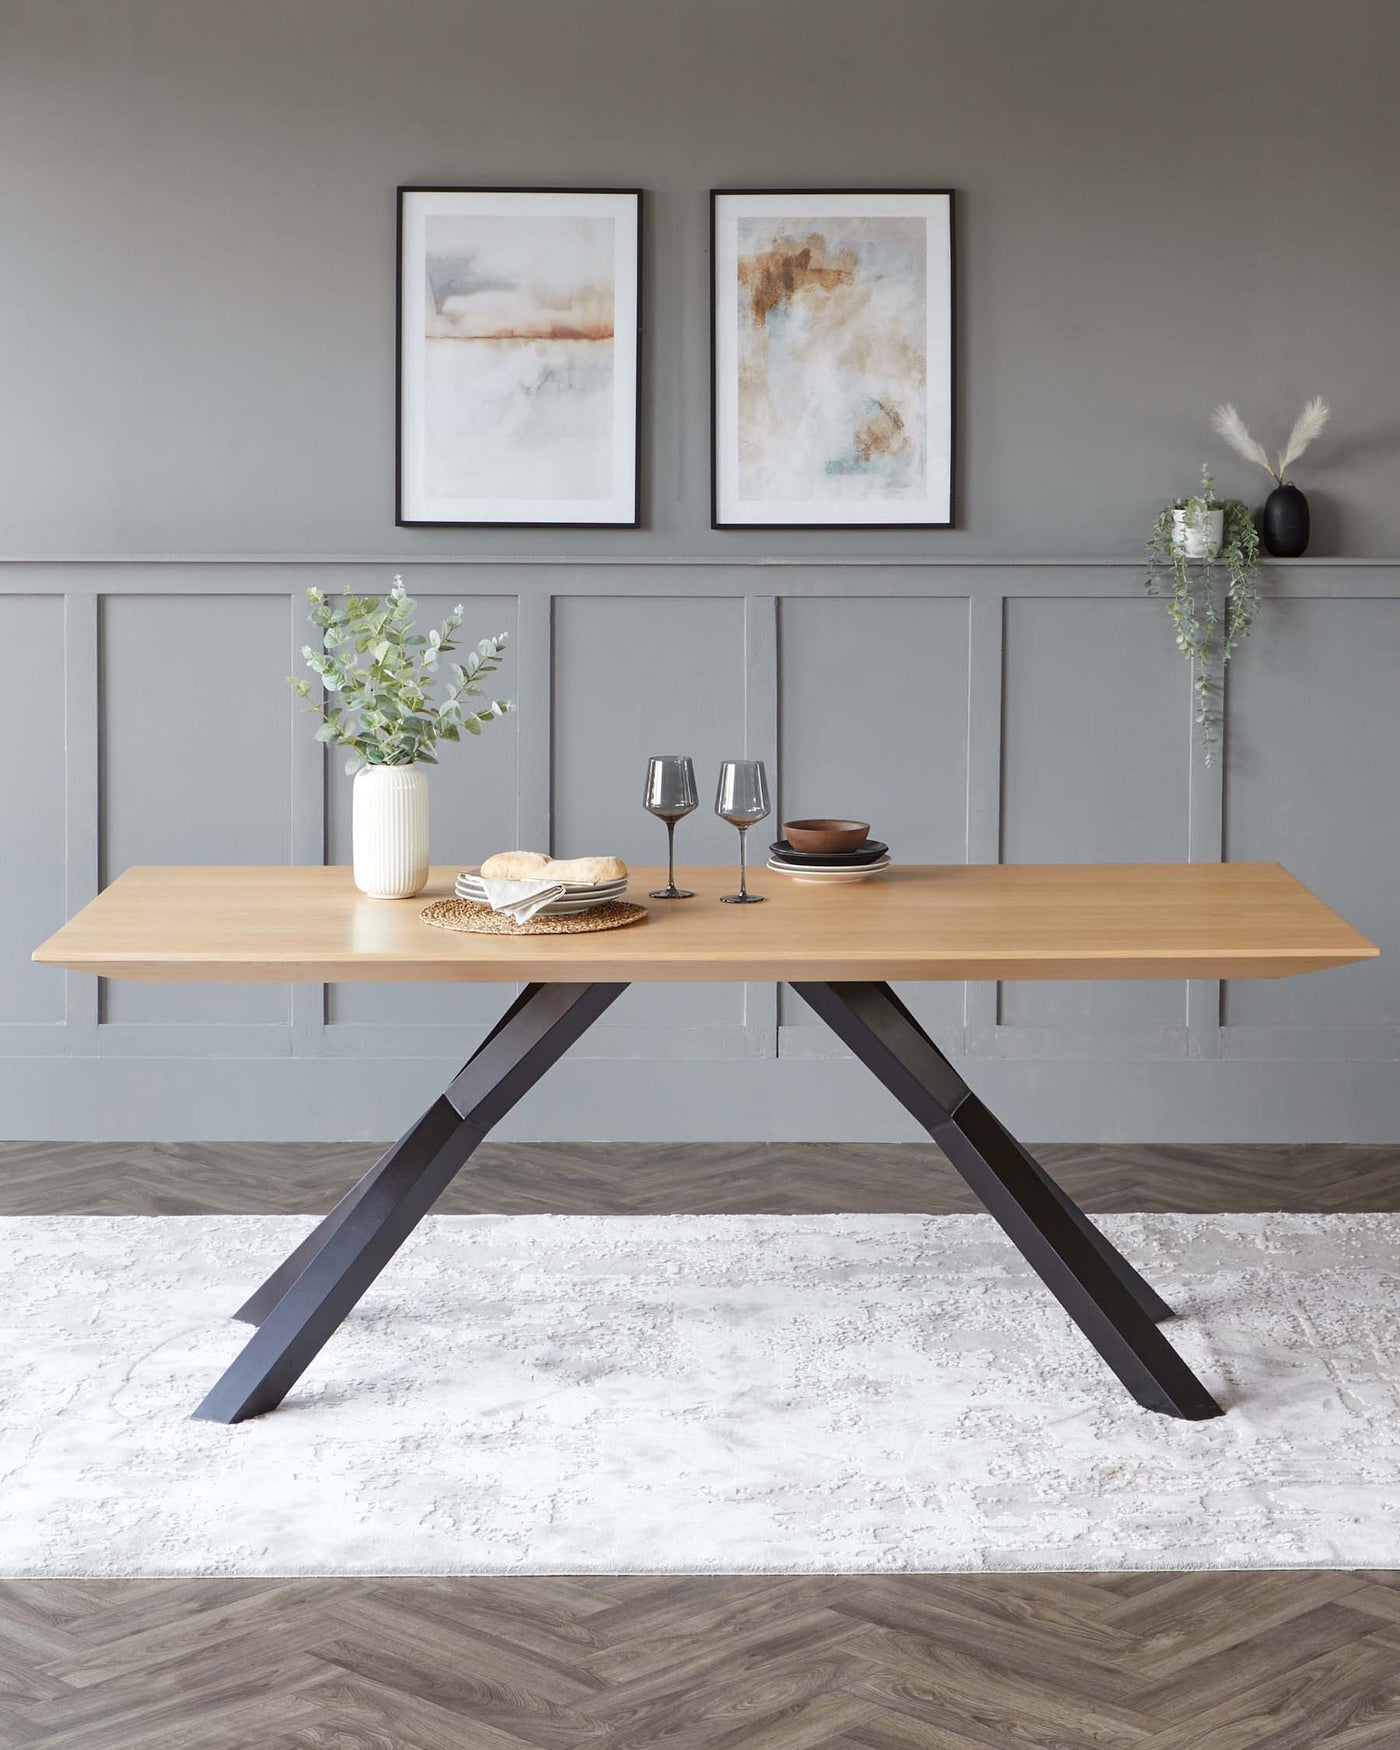 A modern rectangular dining table featuring a light wood tabletop and a pair of sturdy, angular black metal legs in an inverted V-shape, set upon a textured white area rug over herringbone wood flooring.